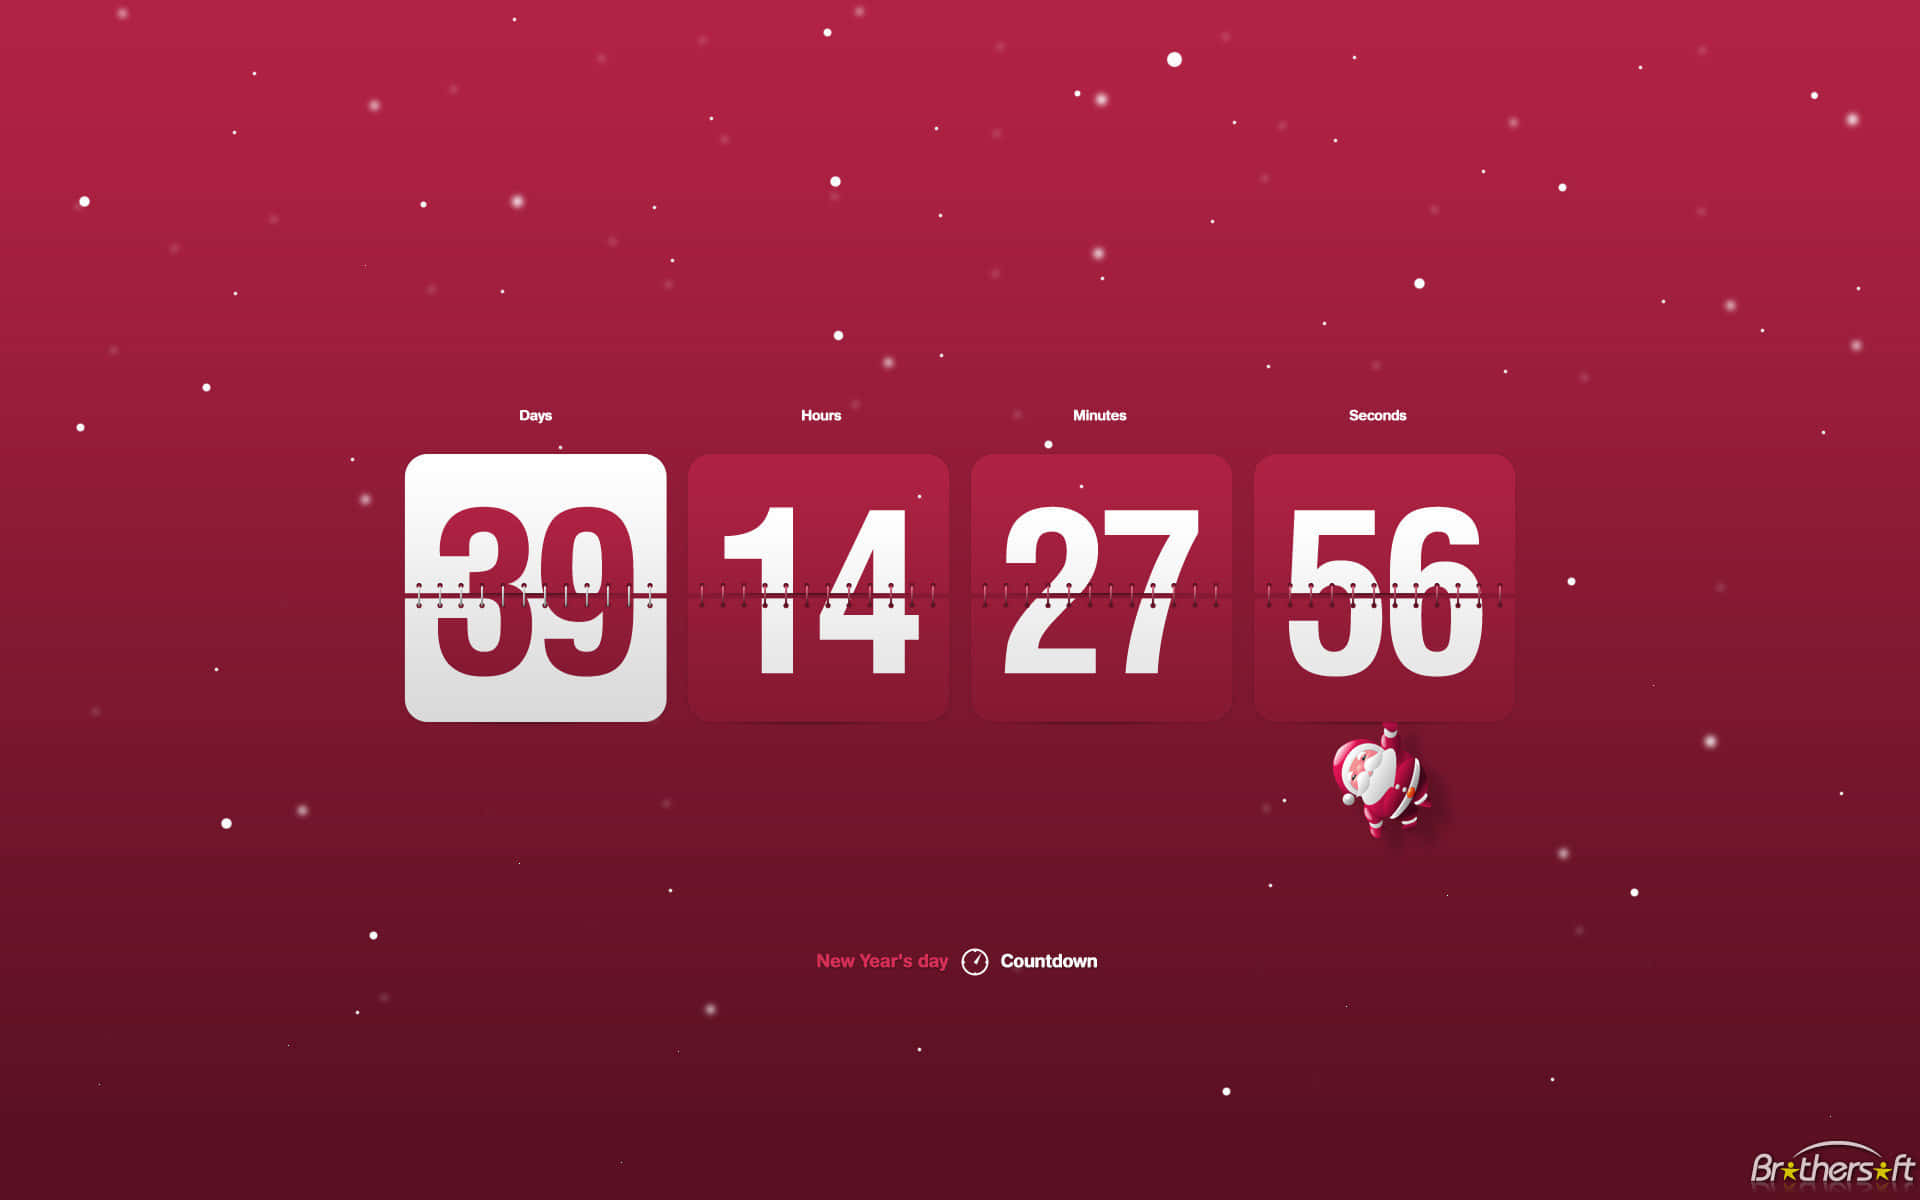 Start the countdown to Christmas Wallpaper